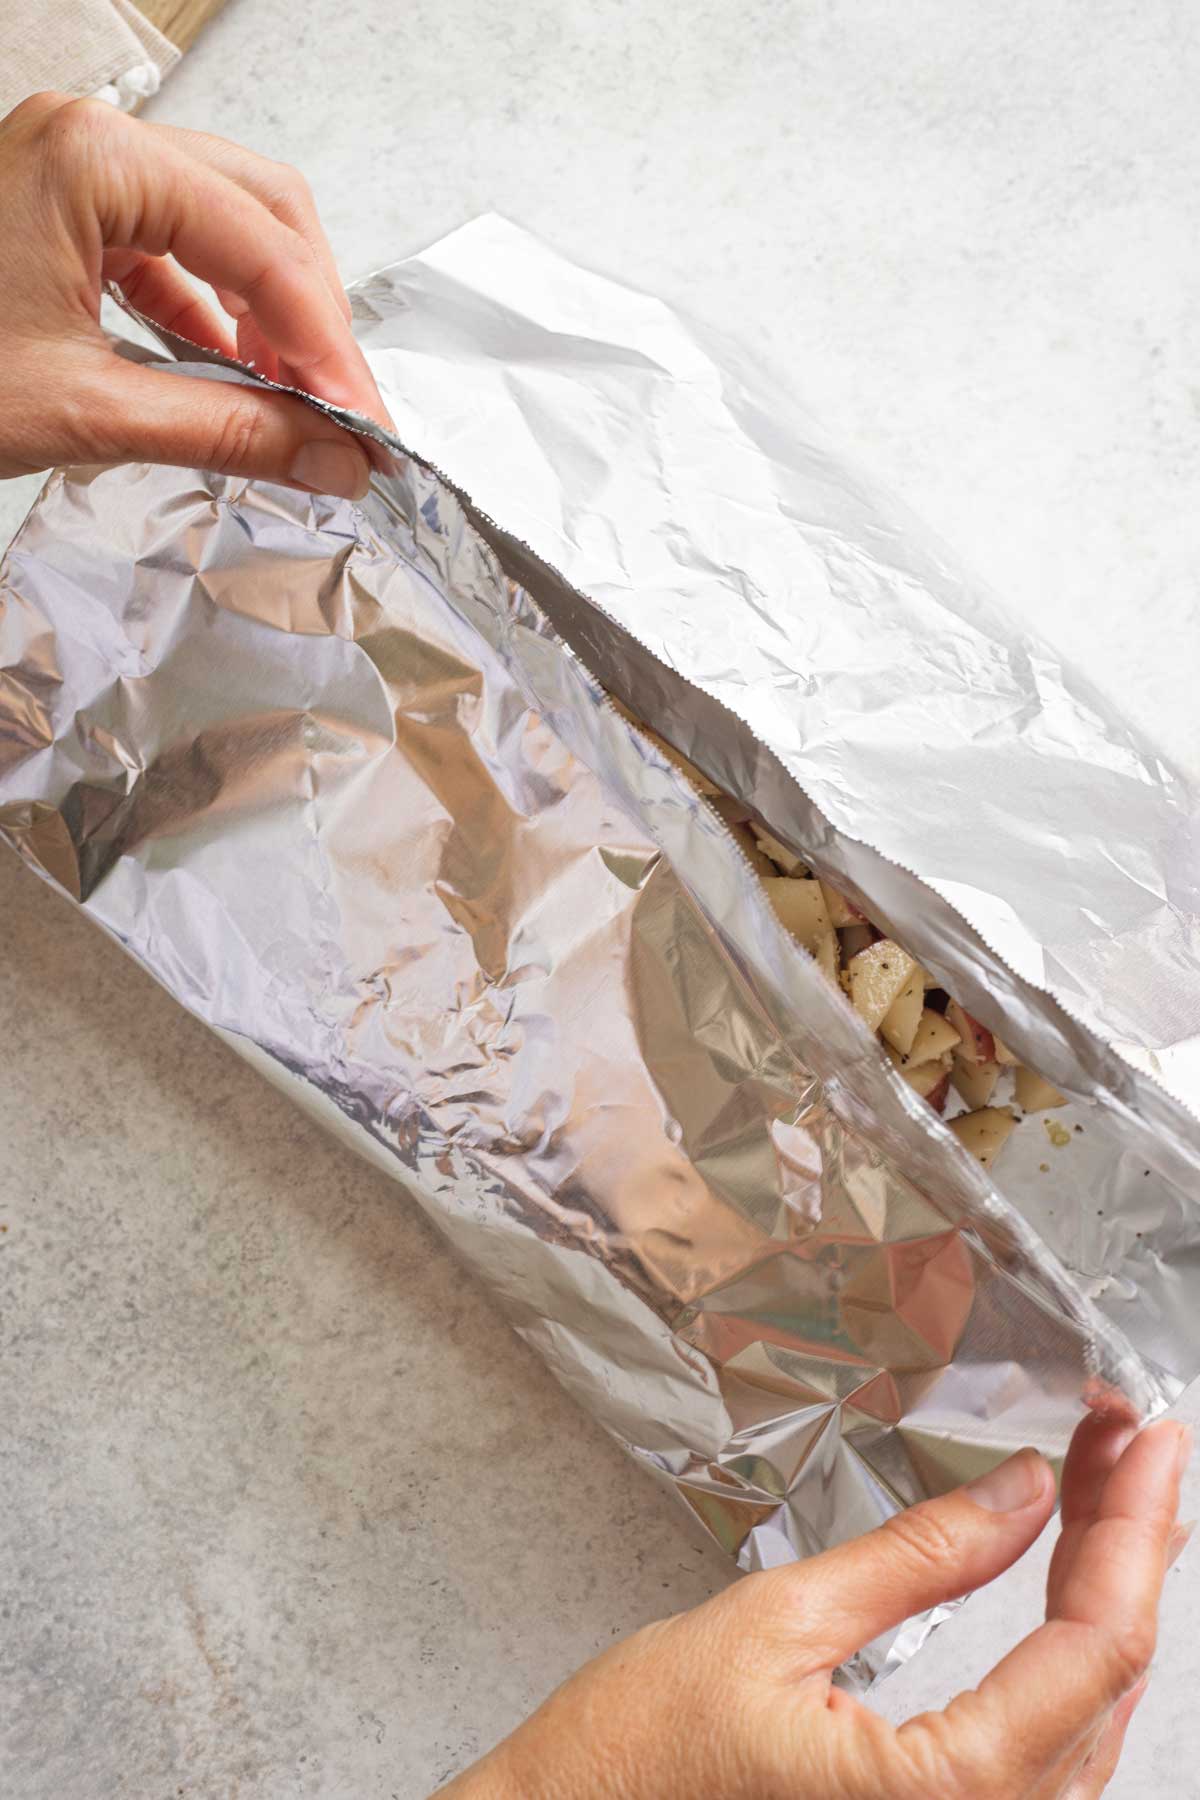 Two hands closing foil over potatoes.